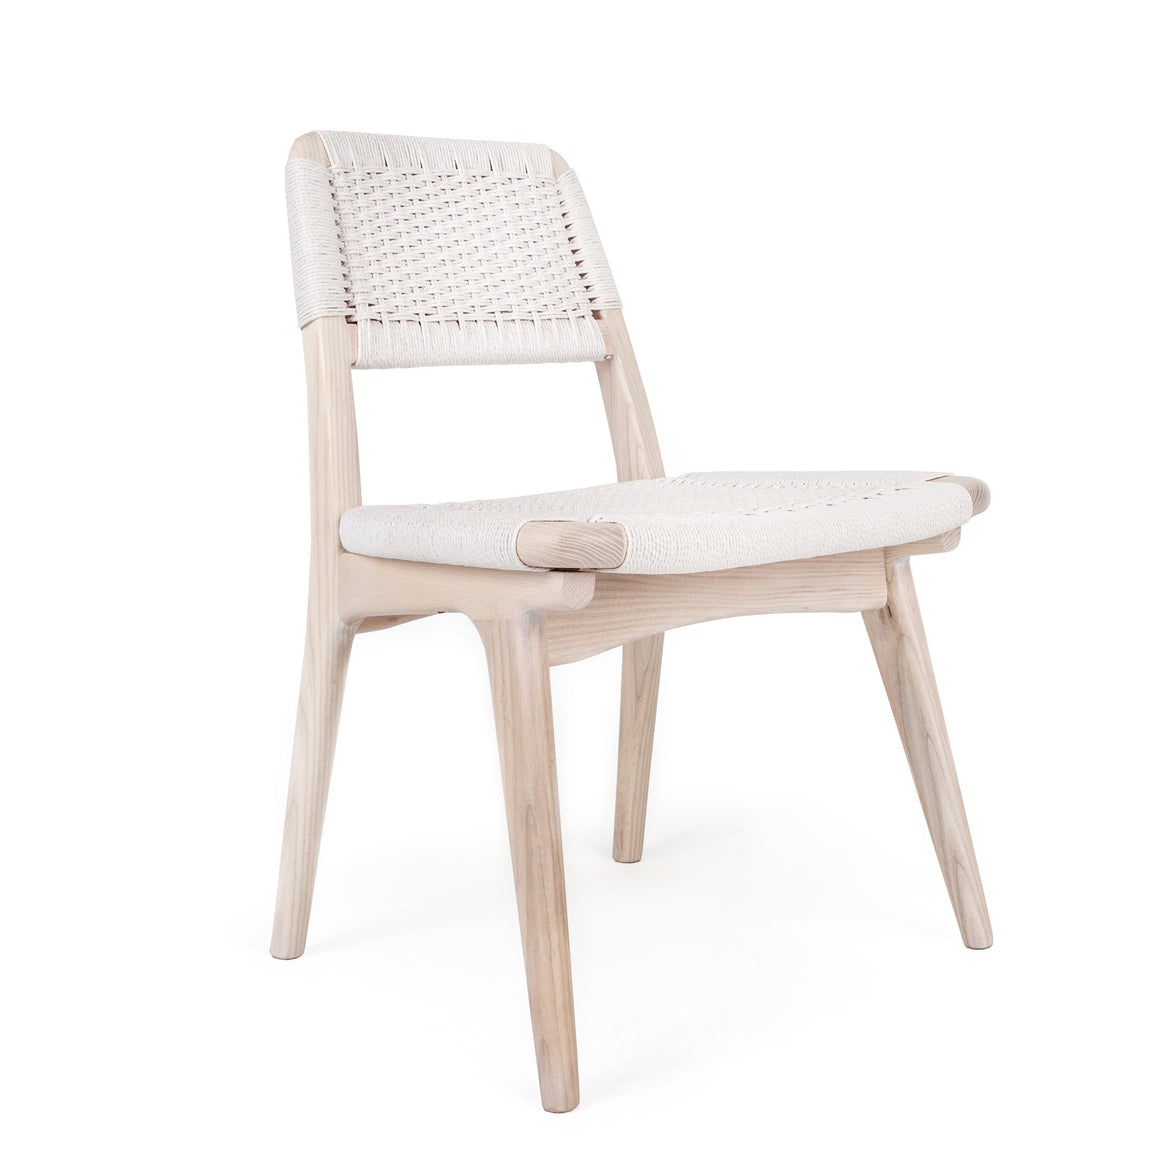 Rian Low Back Chair Pickled White Ash with White Danish Cord